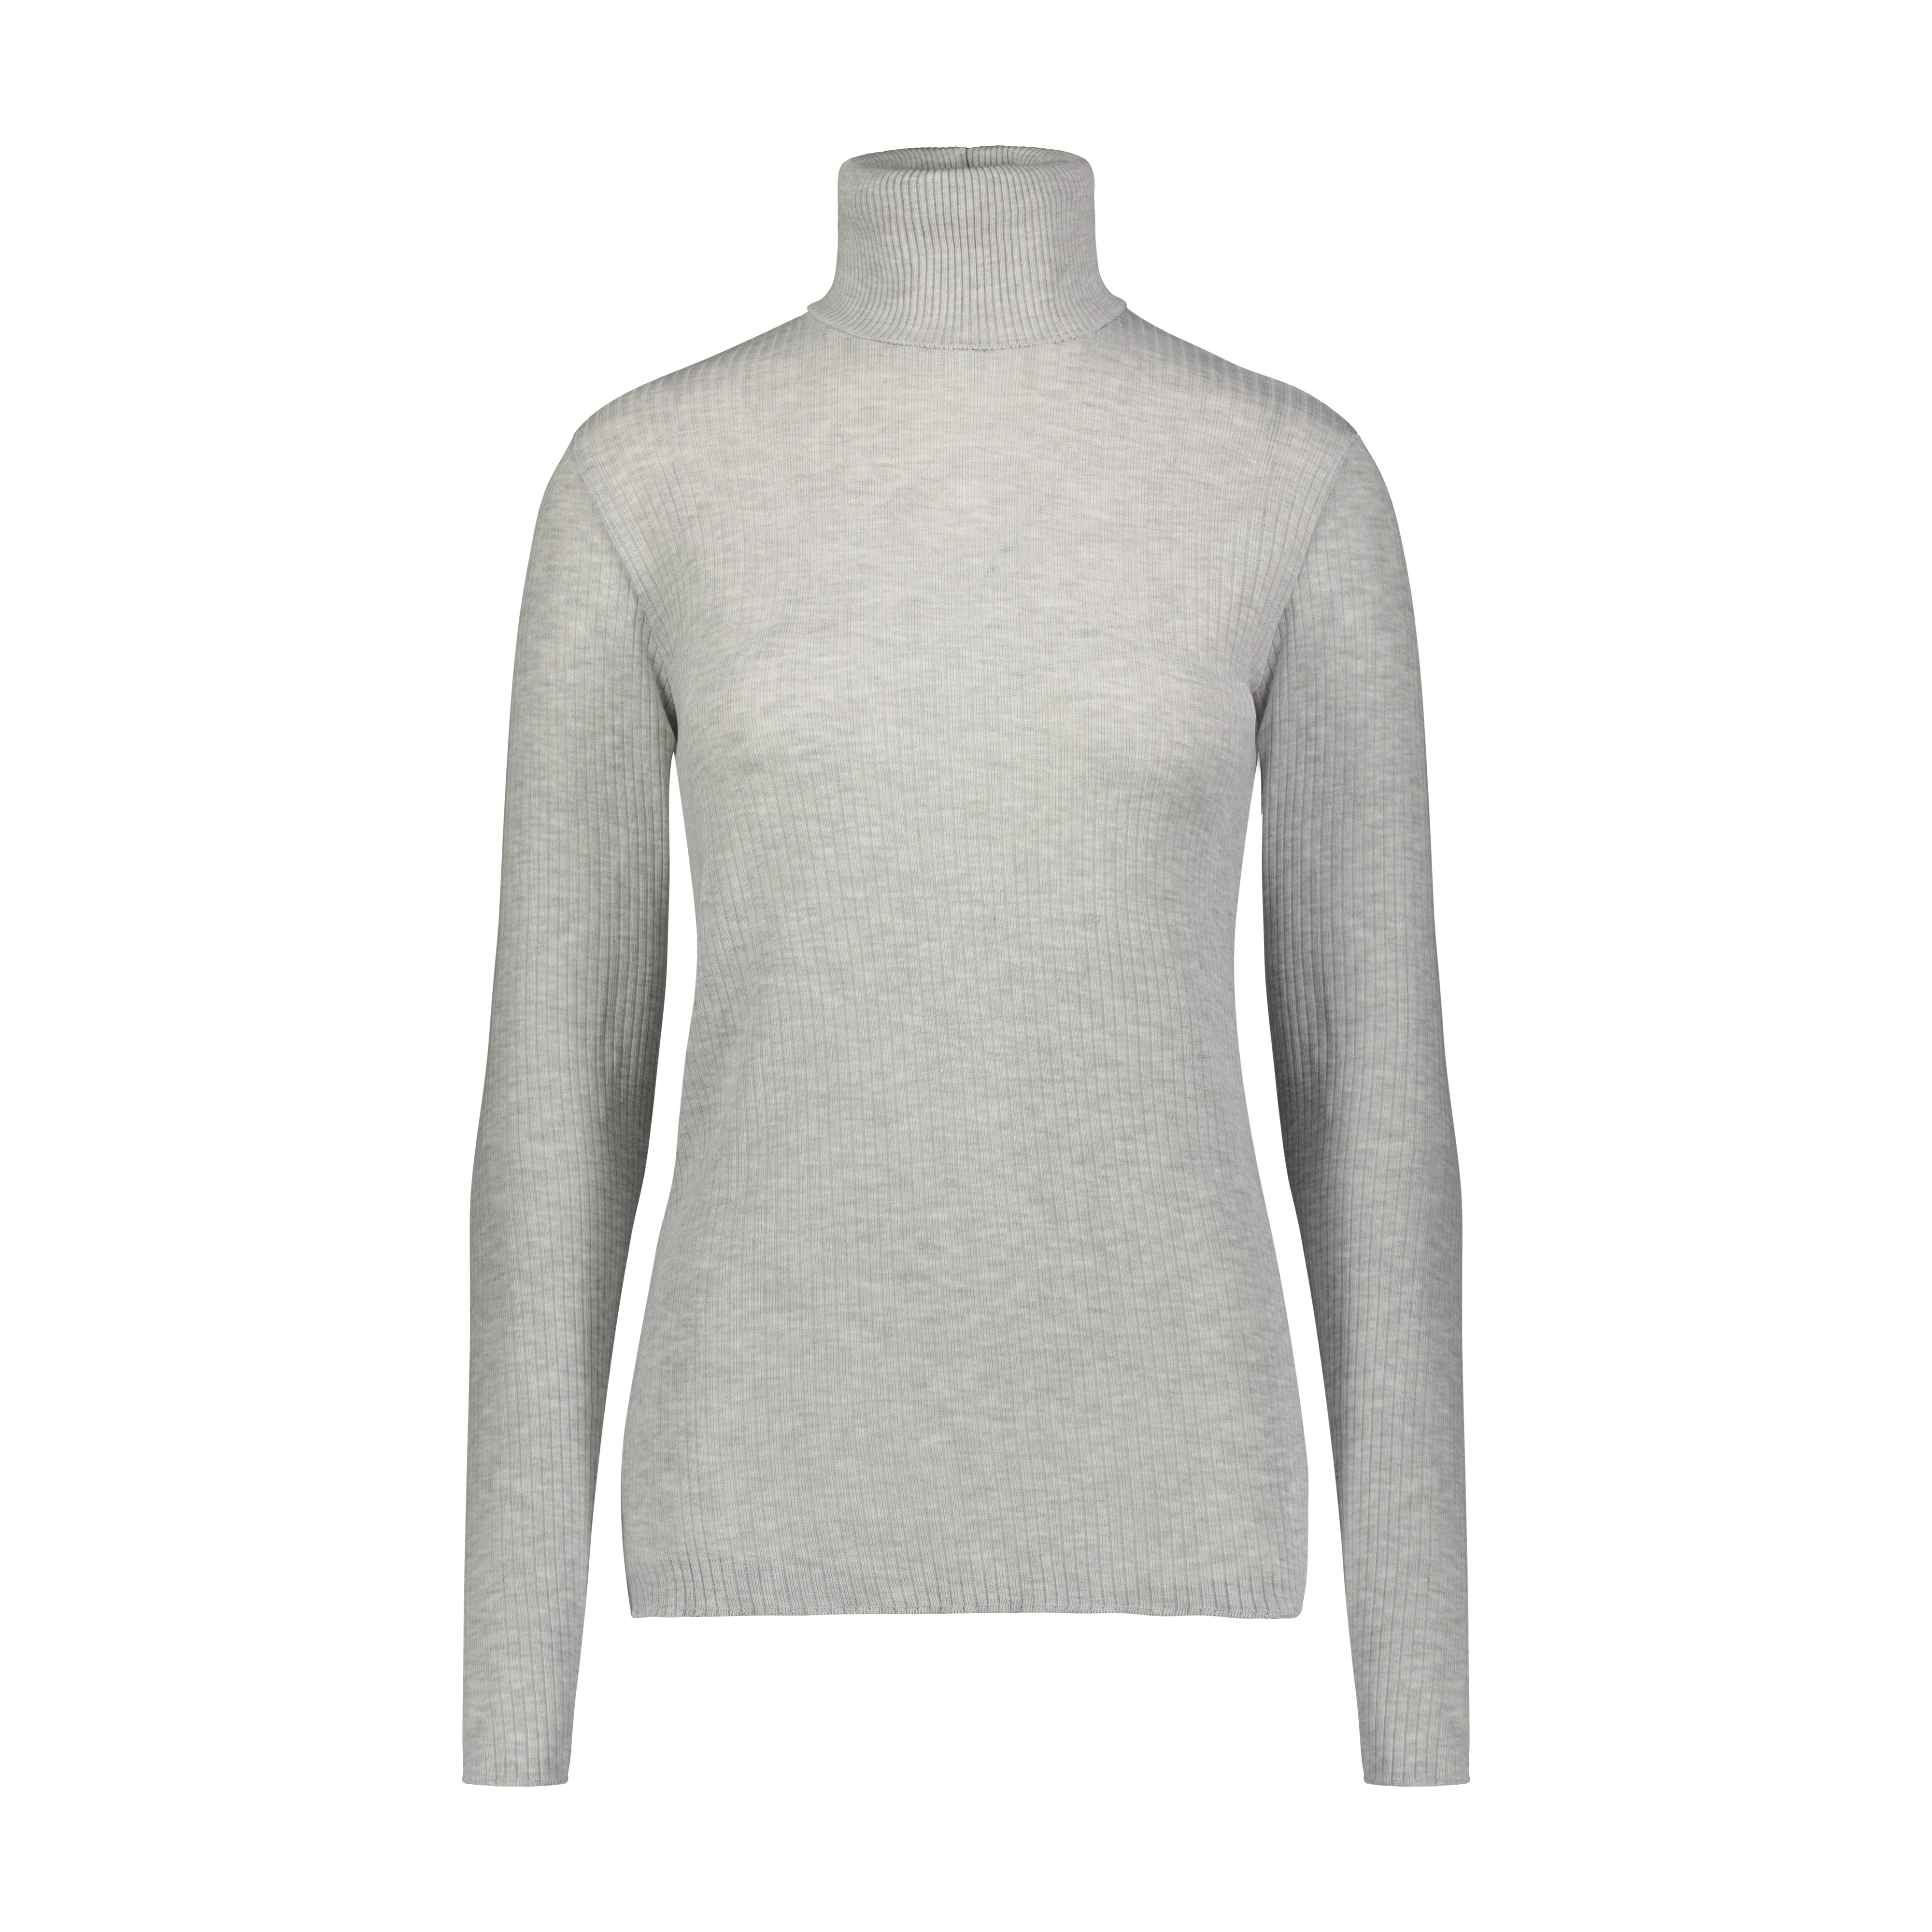 TURTLENECK HEATHER GREY Rib Knit Fitted